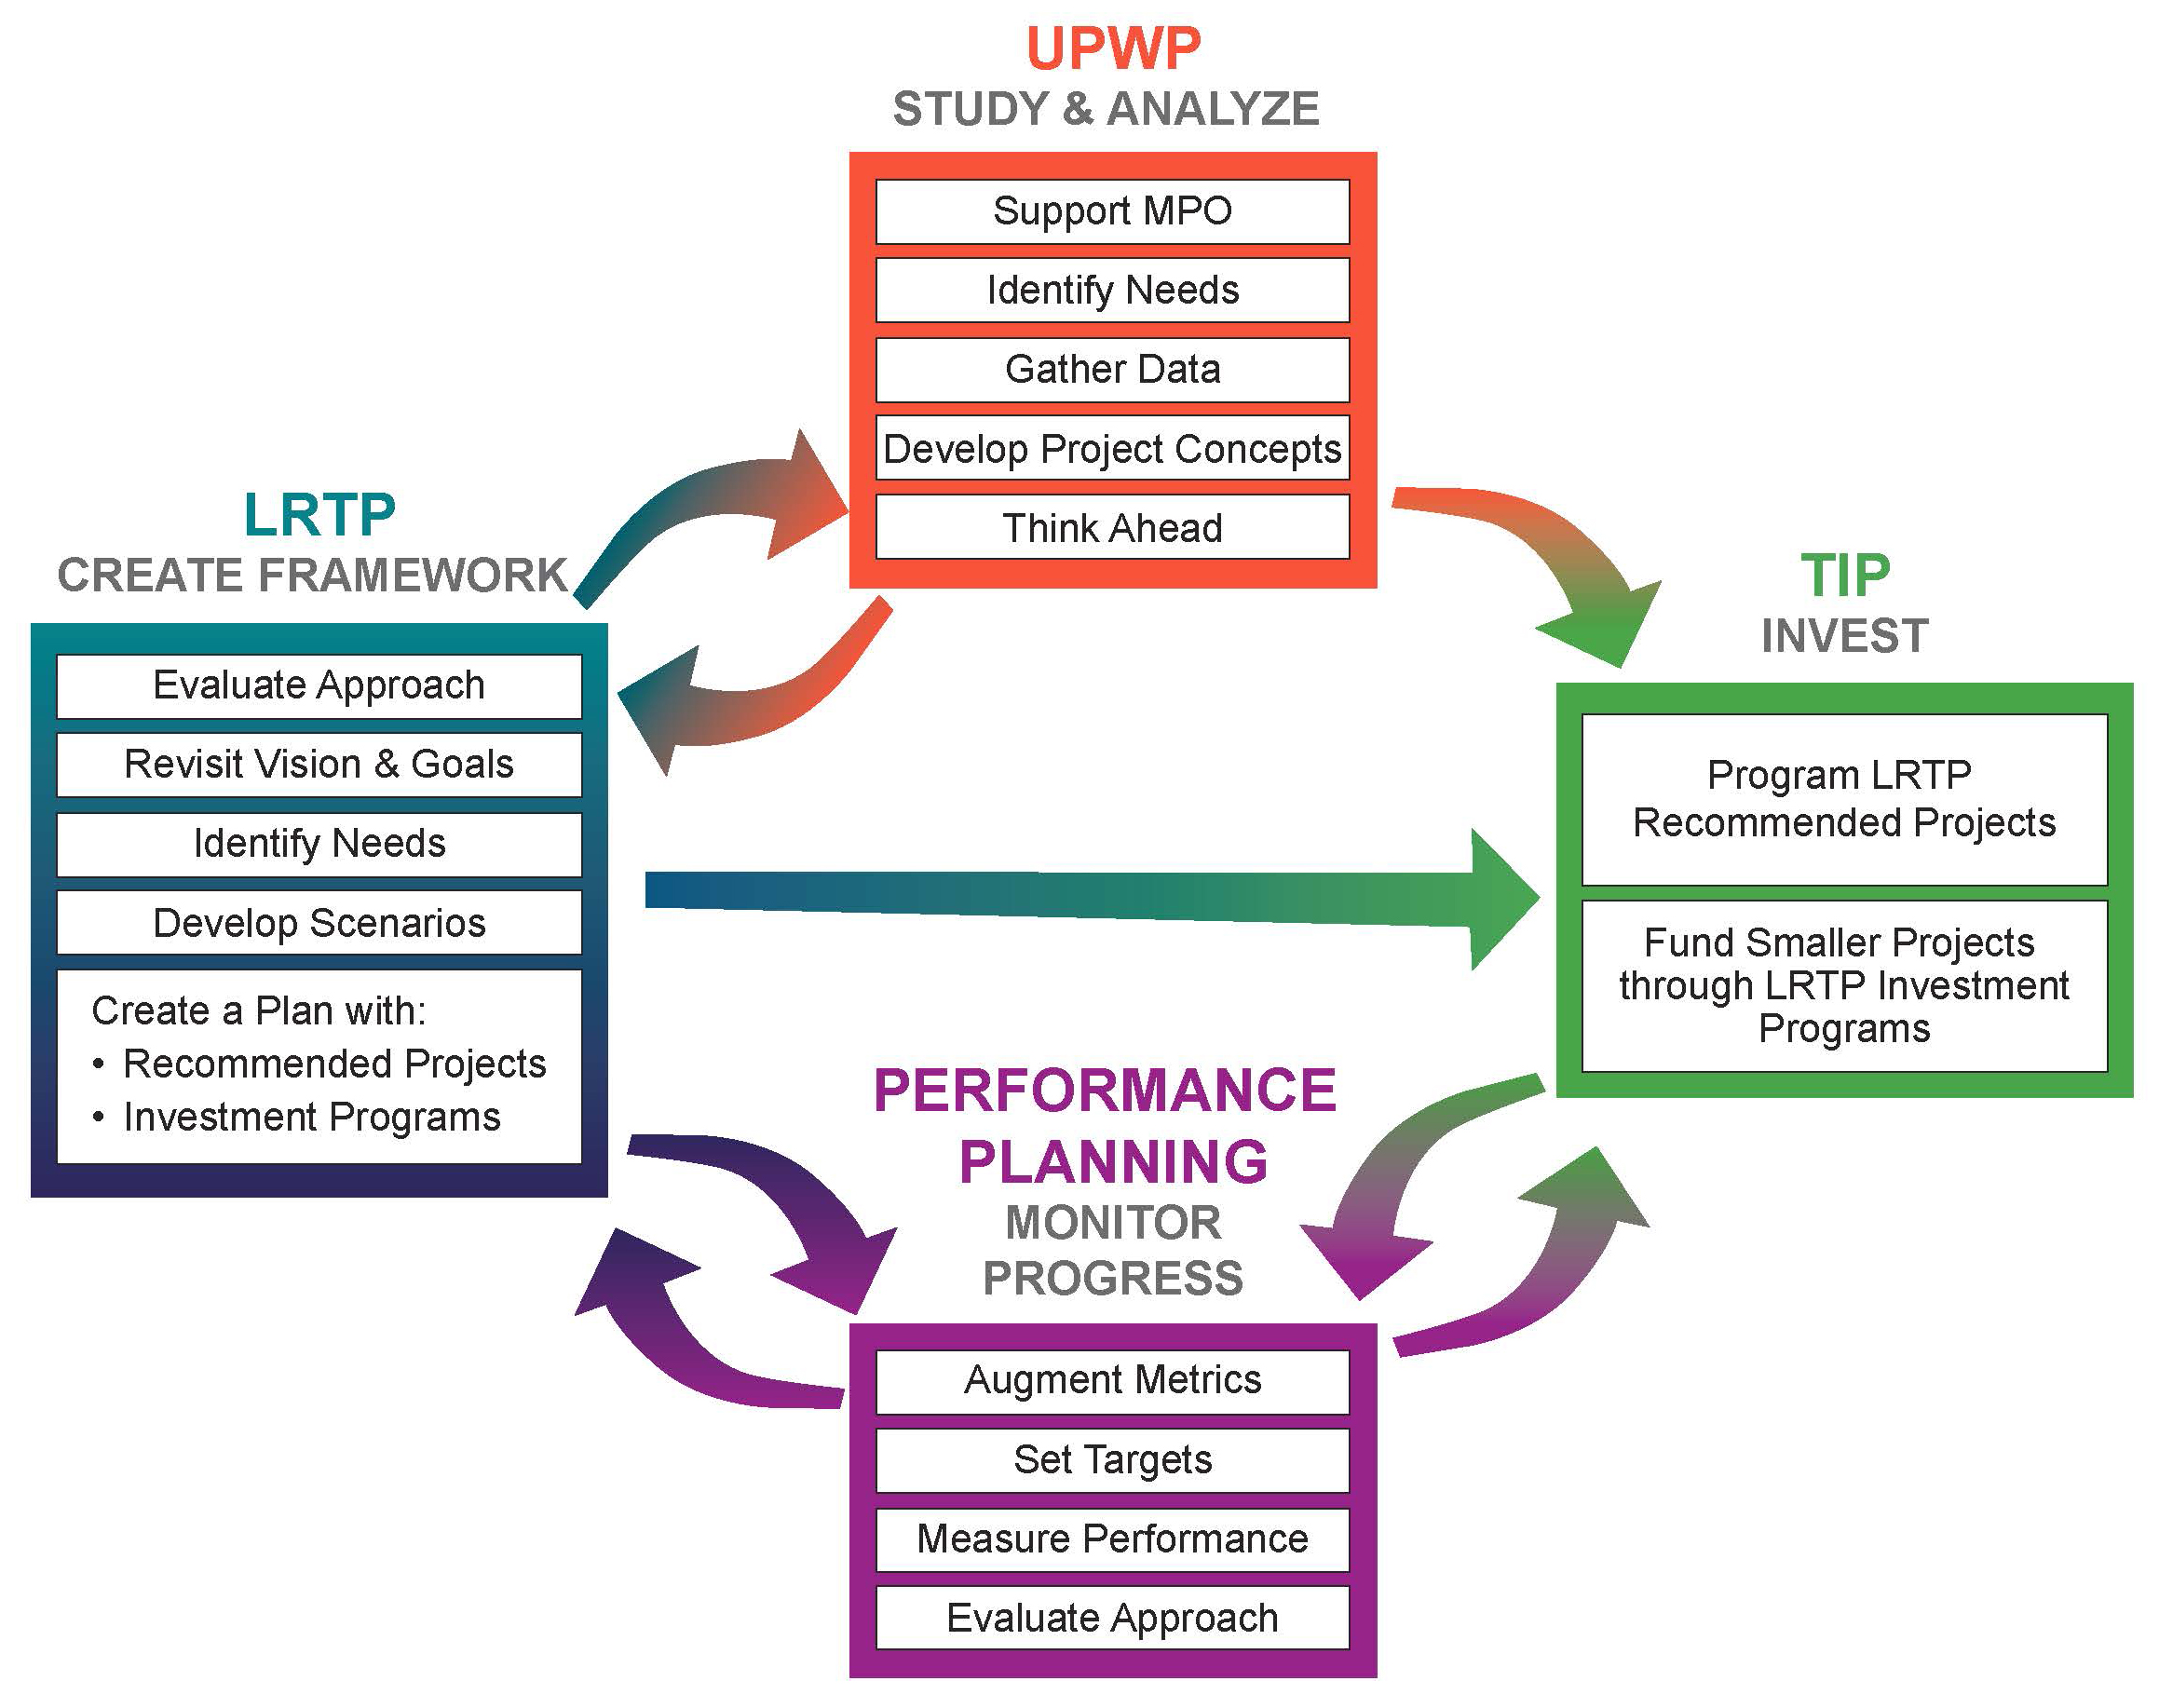 This diagram shows how the elements within the LRTP, TIP, UPWP, and performance planning are related, and how they inform each other.